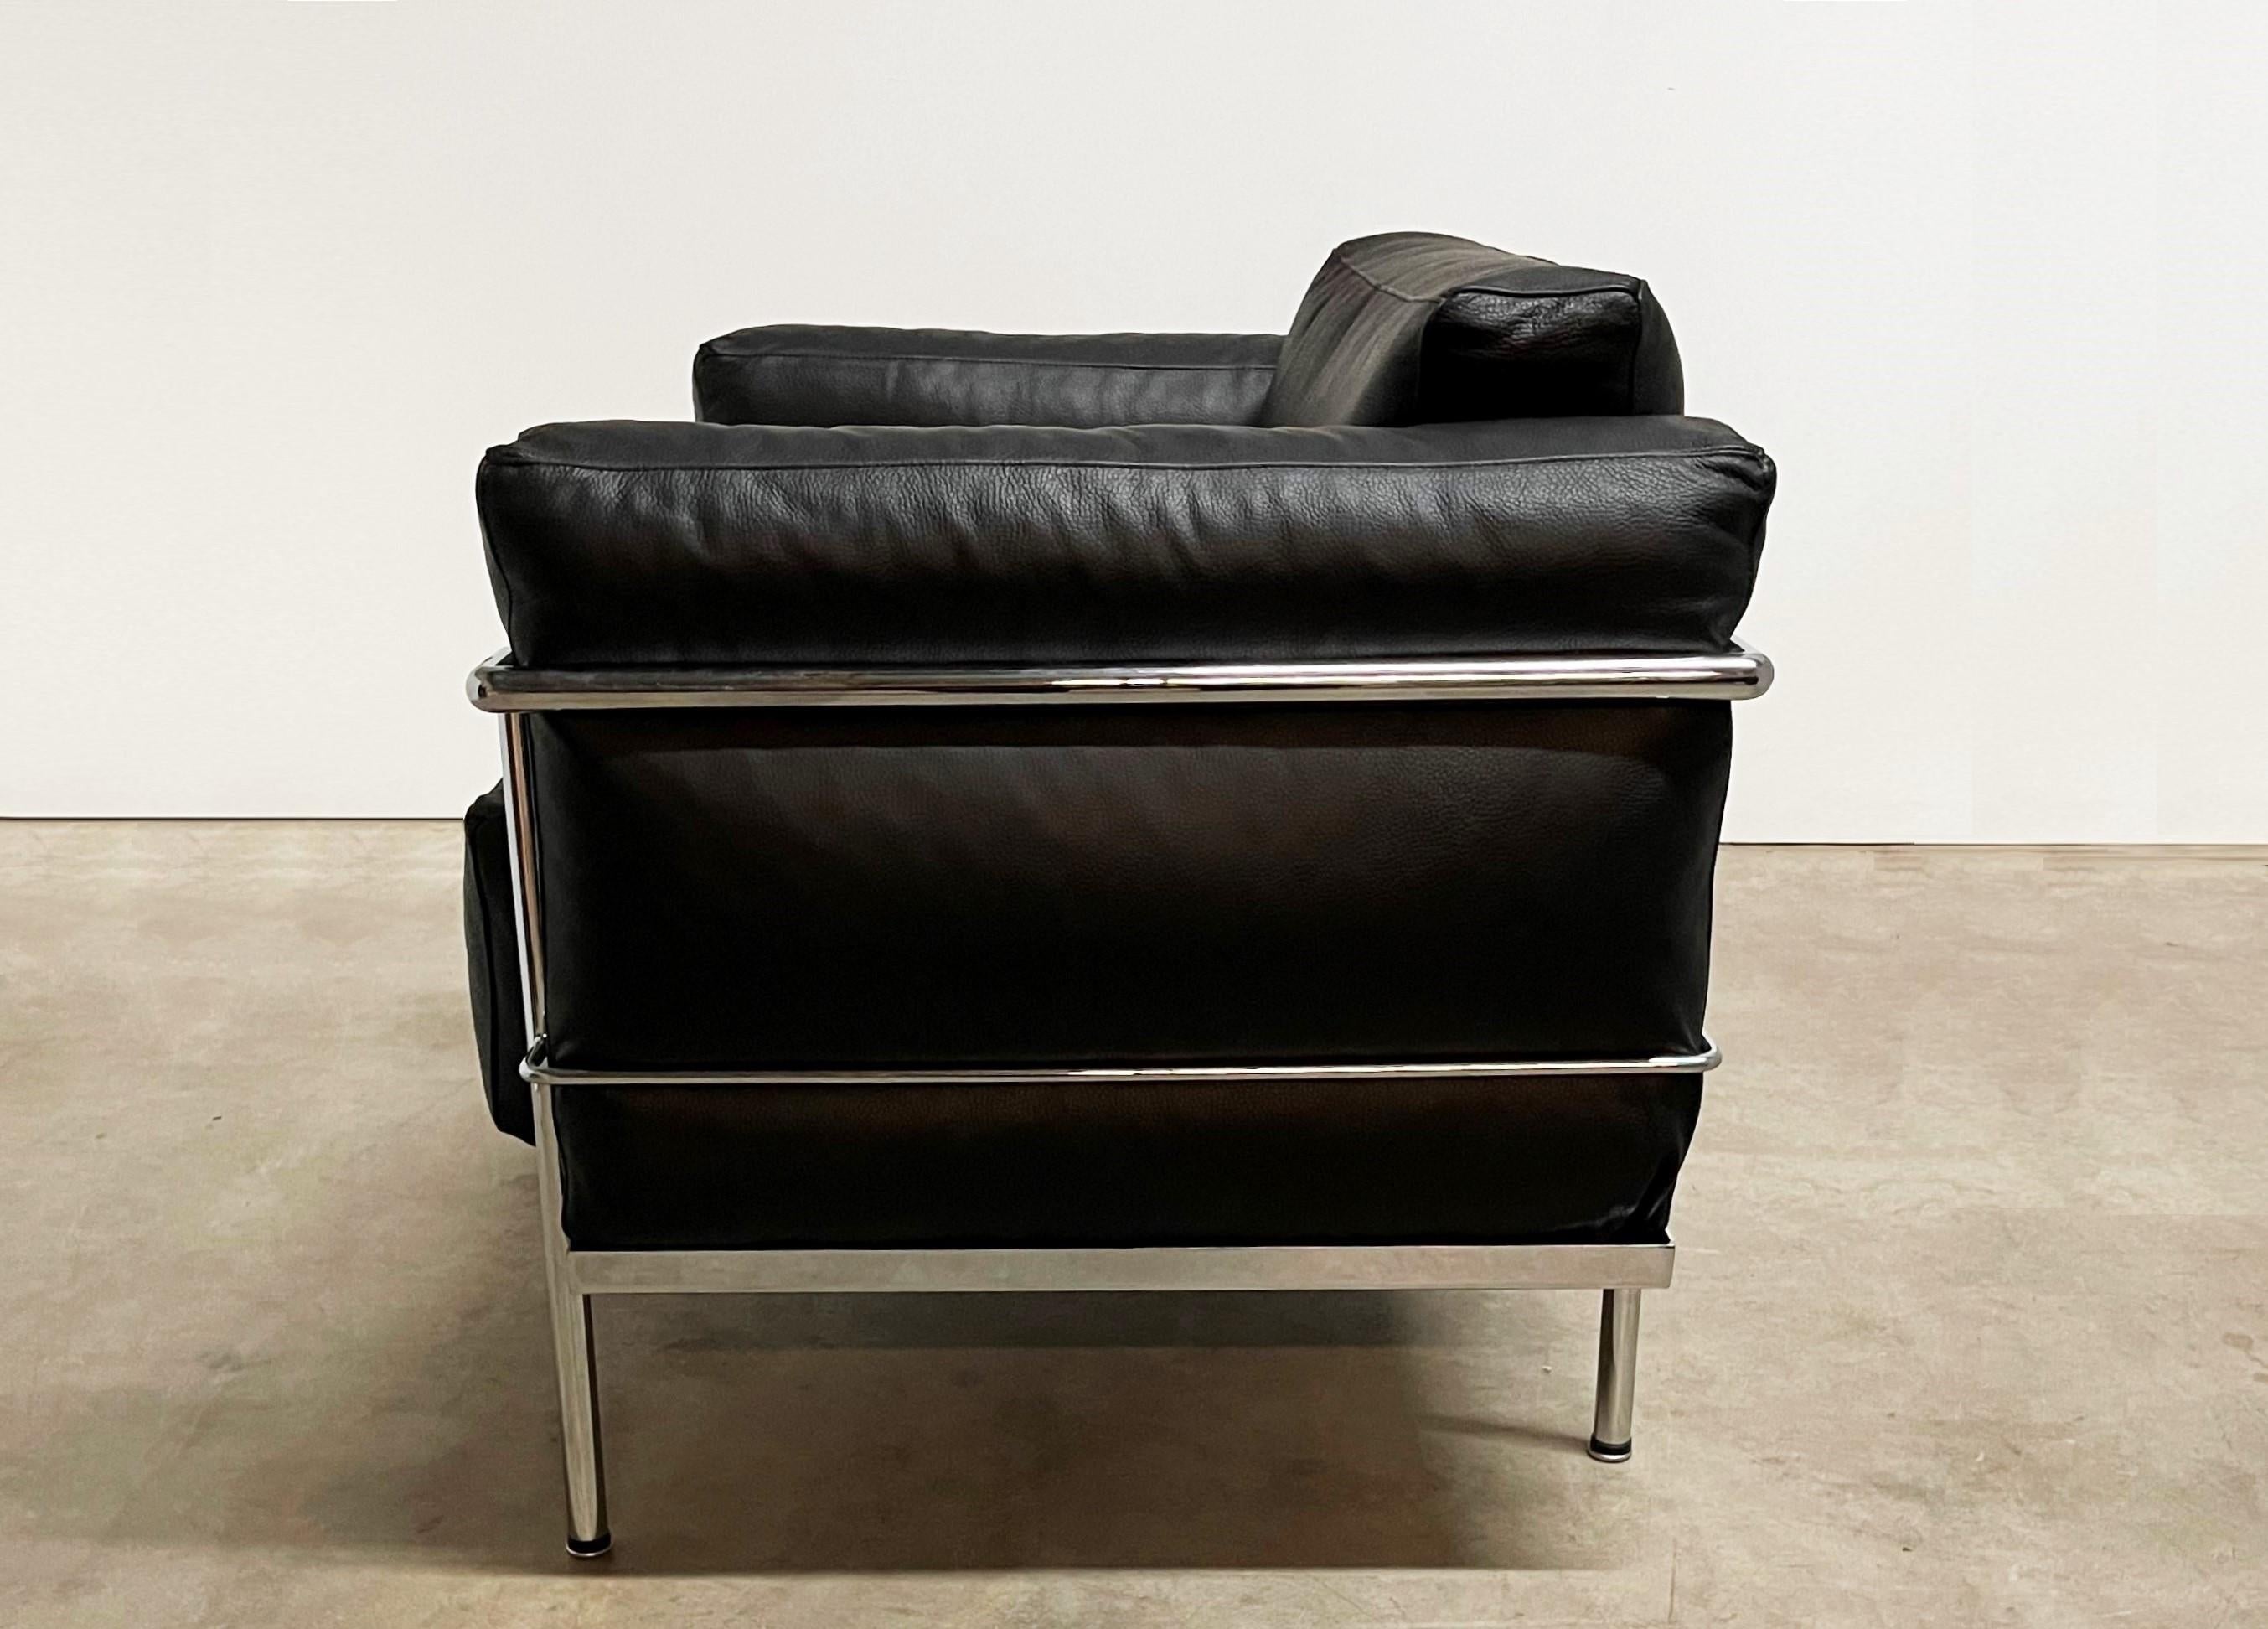 Pierre Jeanneret, Charlotte Perriand & Le Corbusier Grand Comfort Loungesessel im Angebot 1